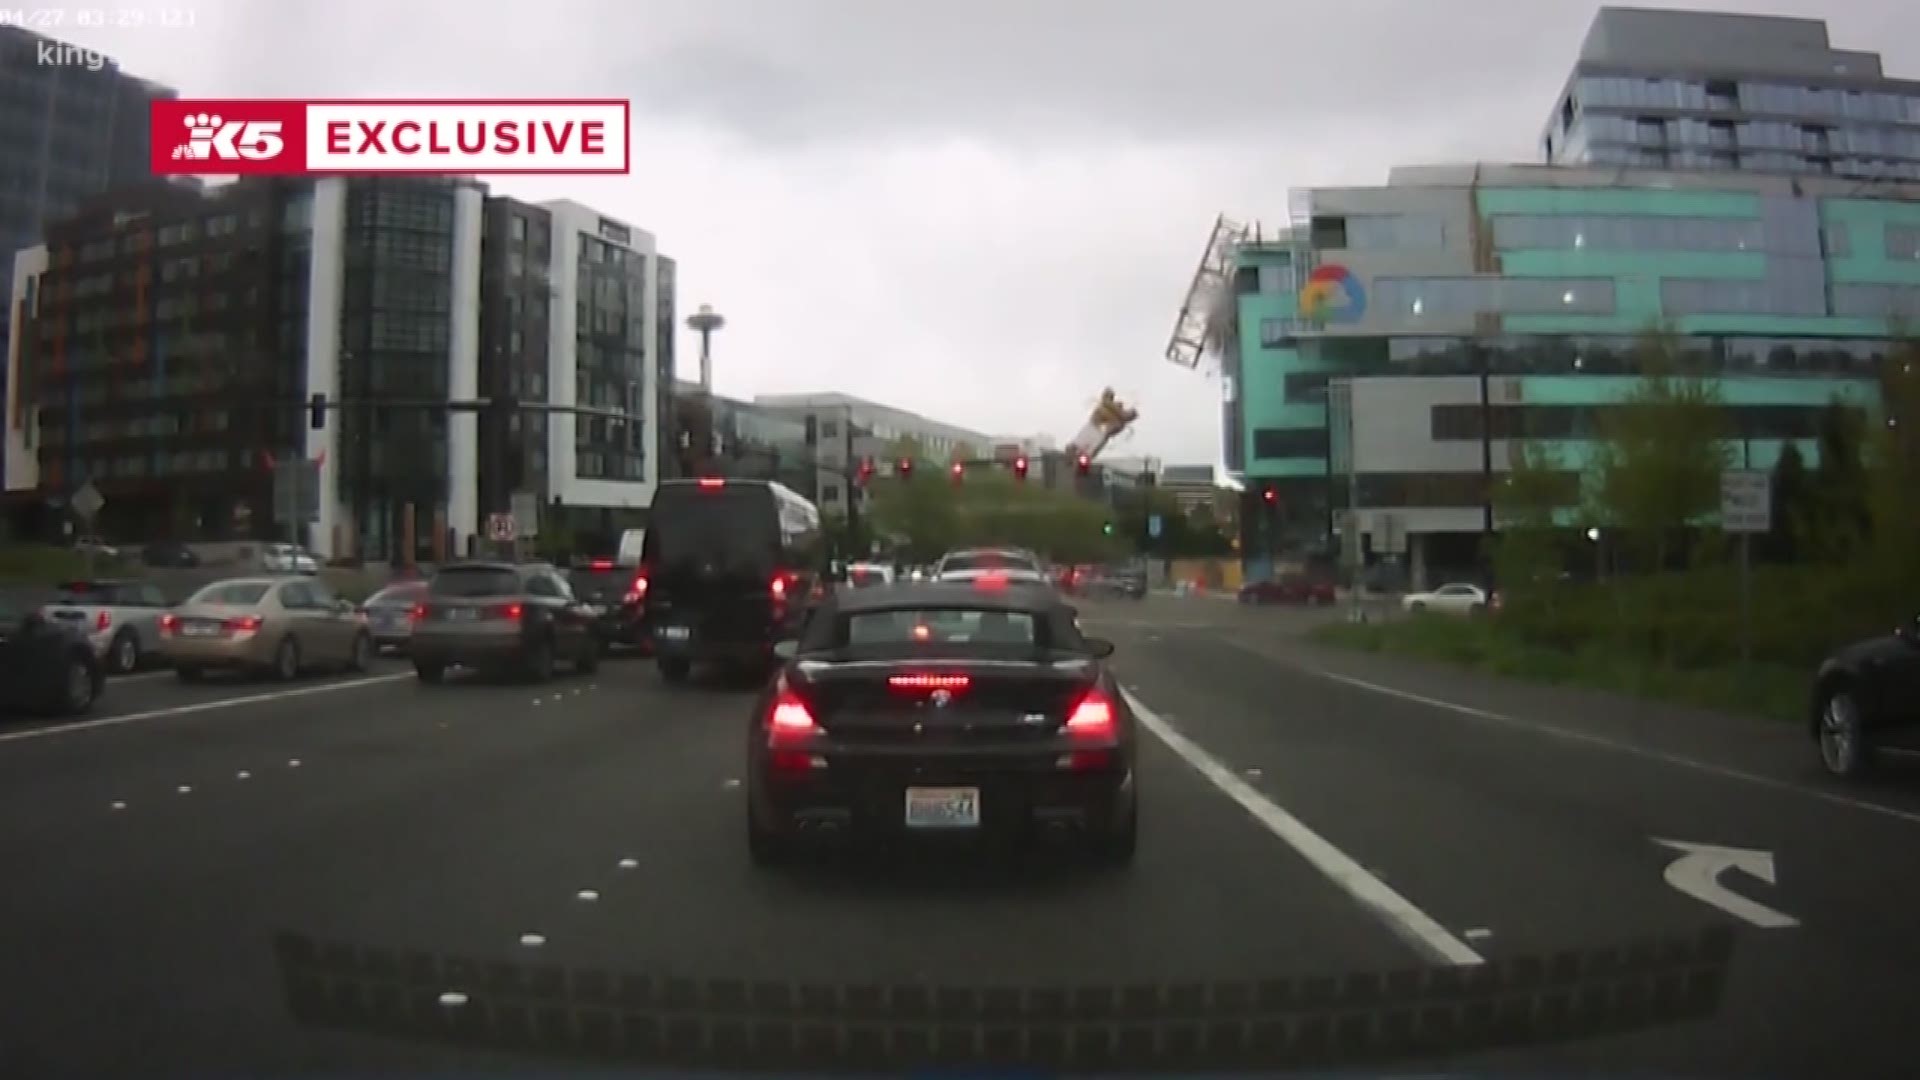 KING 5 obtained dashcam video showing a crane toppling over in downtown Seattle. Four people were killed in the collapse. KING 5’s Susannah Frame reports.